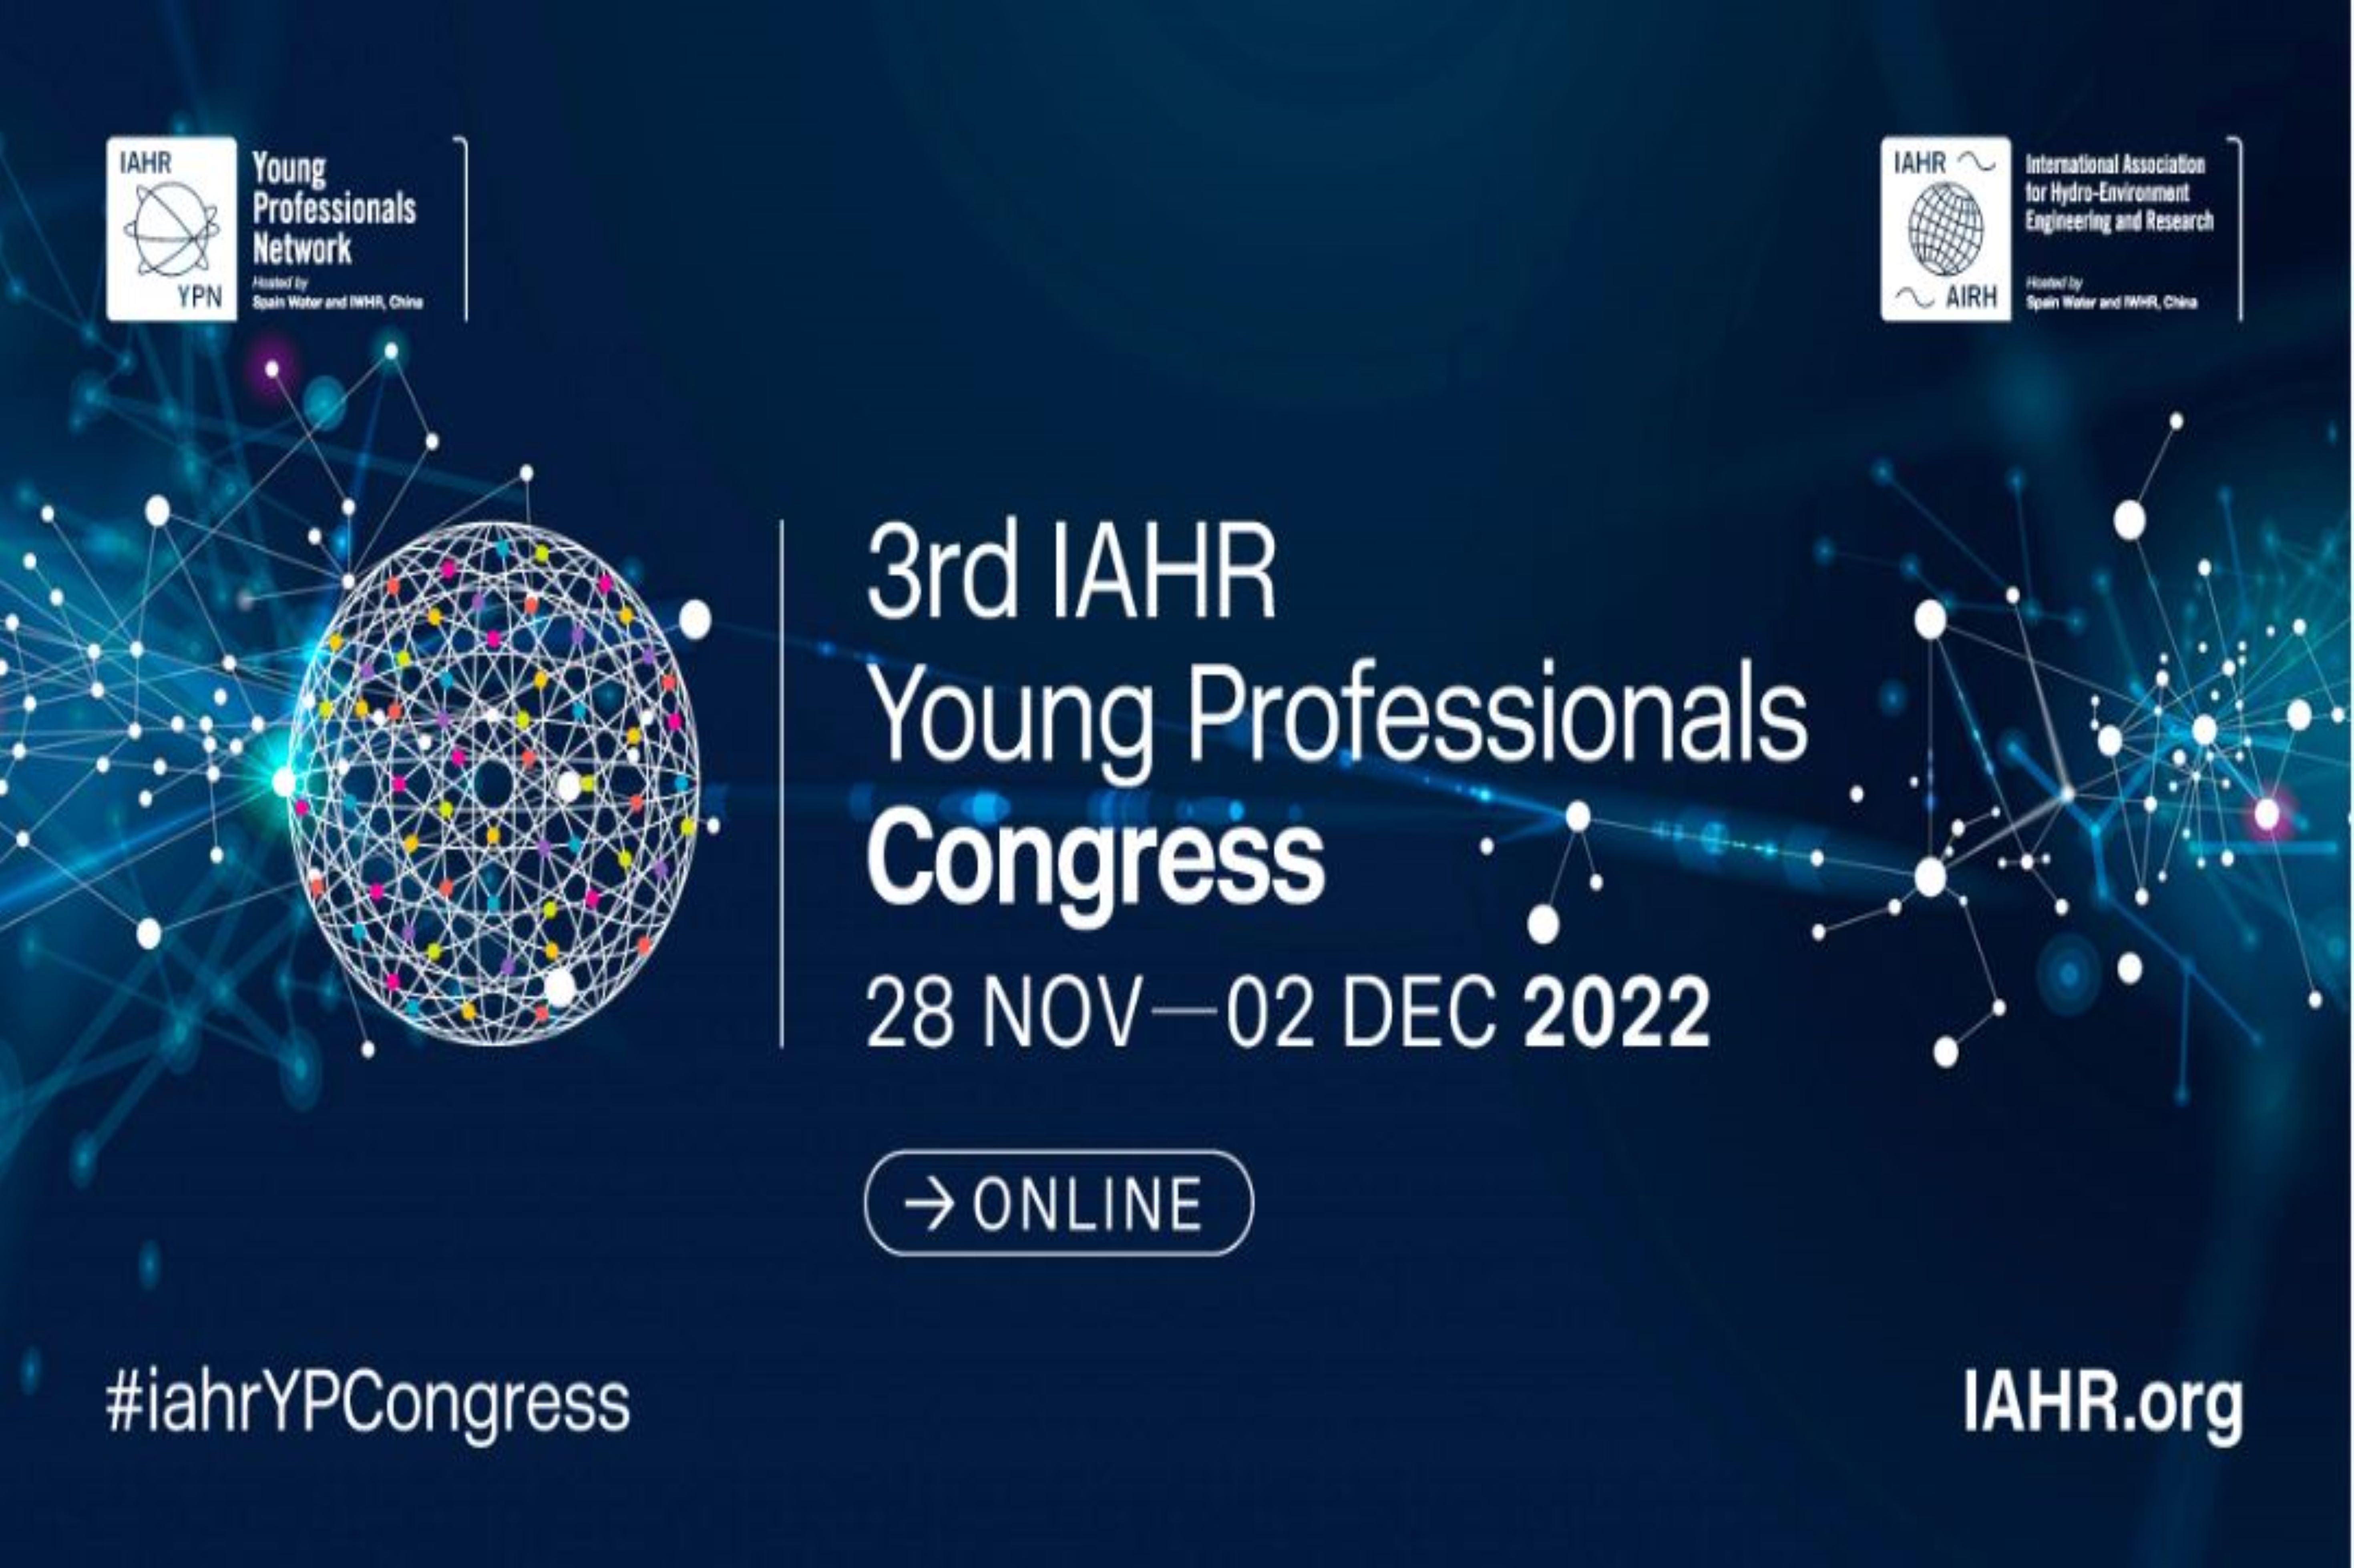 3rd IAHR Young Professionals Congress